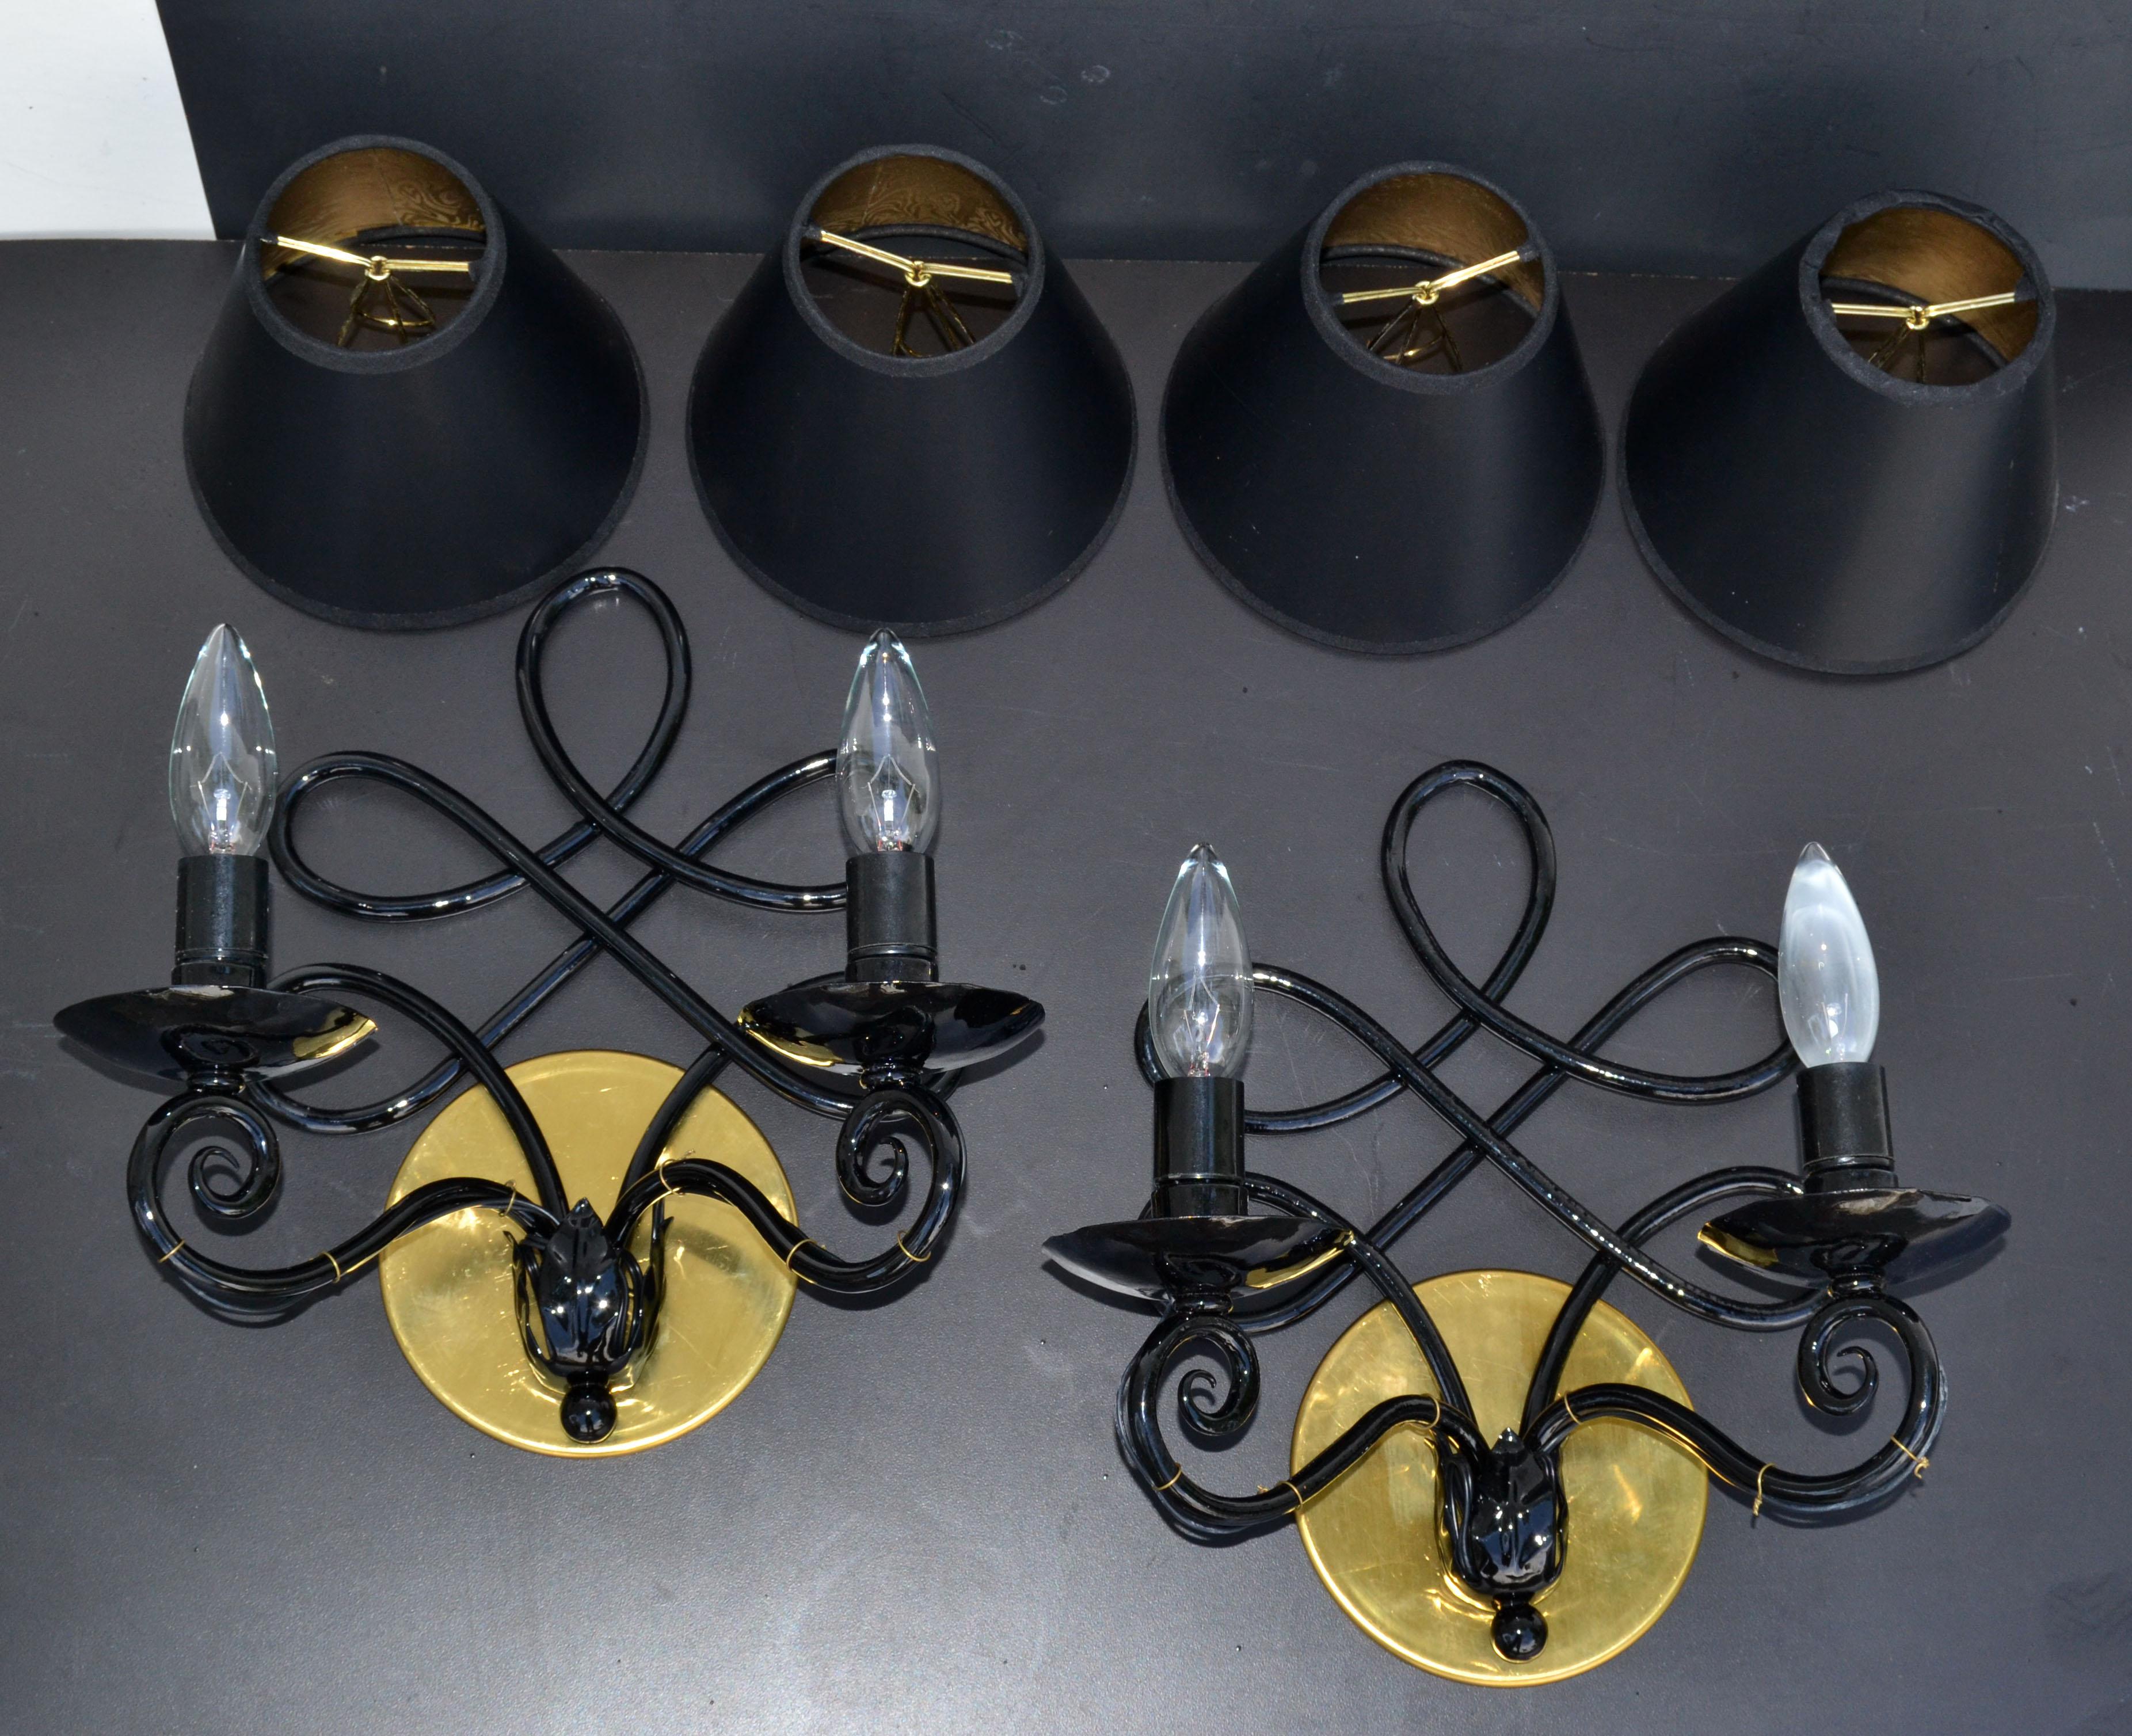 1940 French 2 Lights Wrought Iron Wall Sconces Black Gloss Finish Art Deco, Pair 9